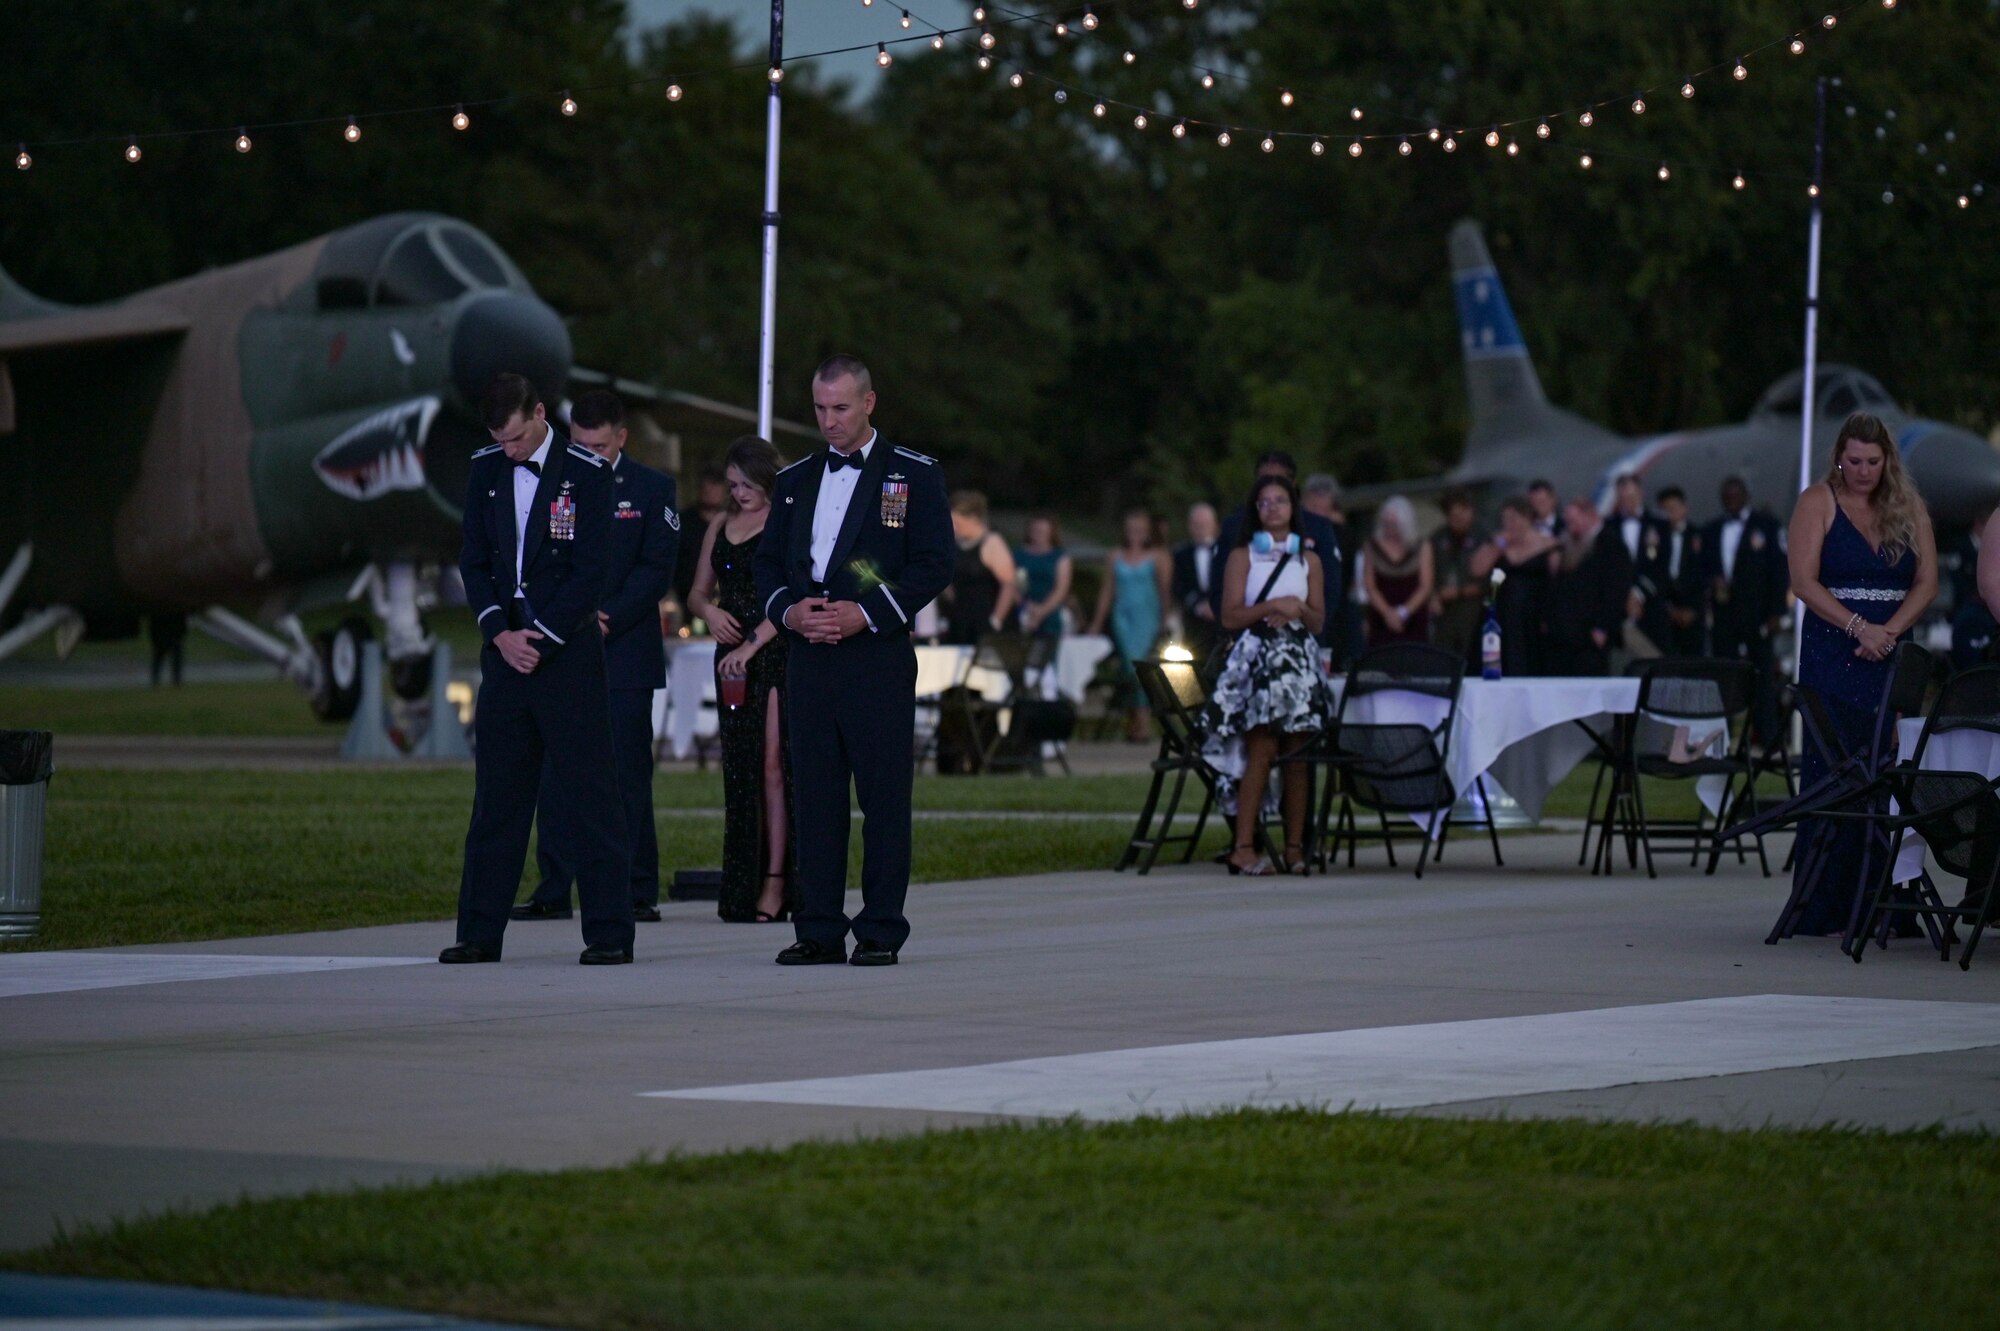 U.S. Air Force Col. Russell Cook, 23rd Wing commander, left, and Col. Timothy Hood, 93rd Air Ground Operations Wing commander, stand at the front of the George W. Bush Air Park for a prayer during the 75th Air Force Ball, Sept. 17, 2022, at Moody Air Force Base, Georgia. The Air Force Ball celebrates 75 years of tradition and Airmen answering their nation's call to serve their country. (U.S. Air Force photo by Senior Airman Rebeckah Medeiros)